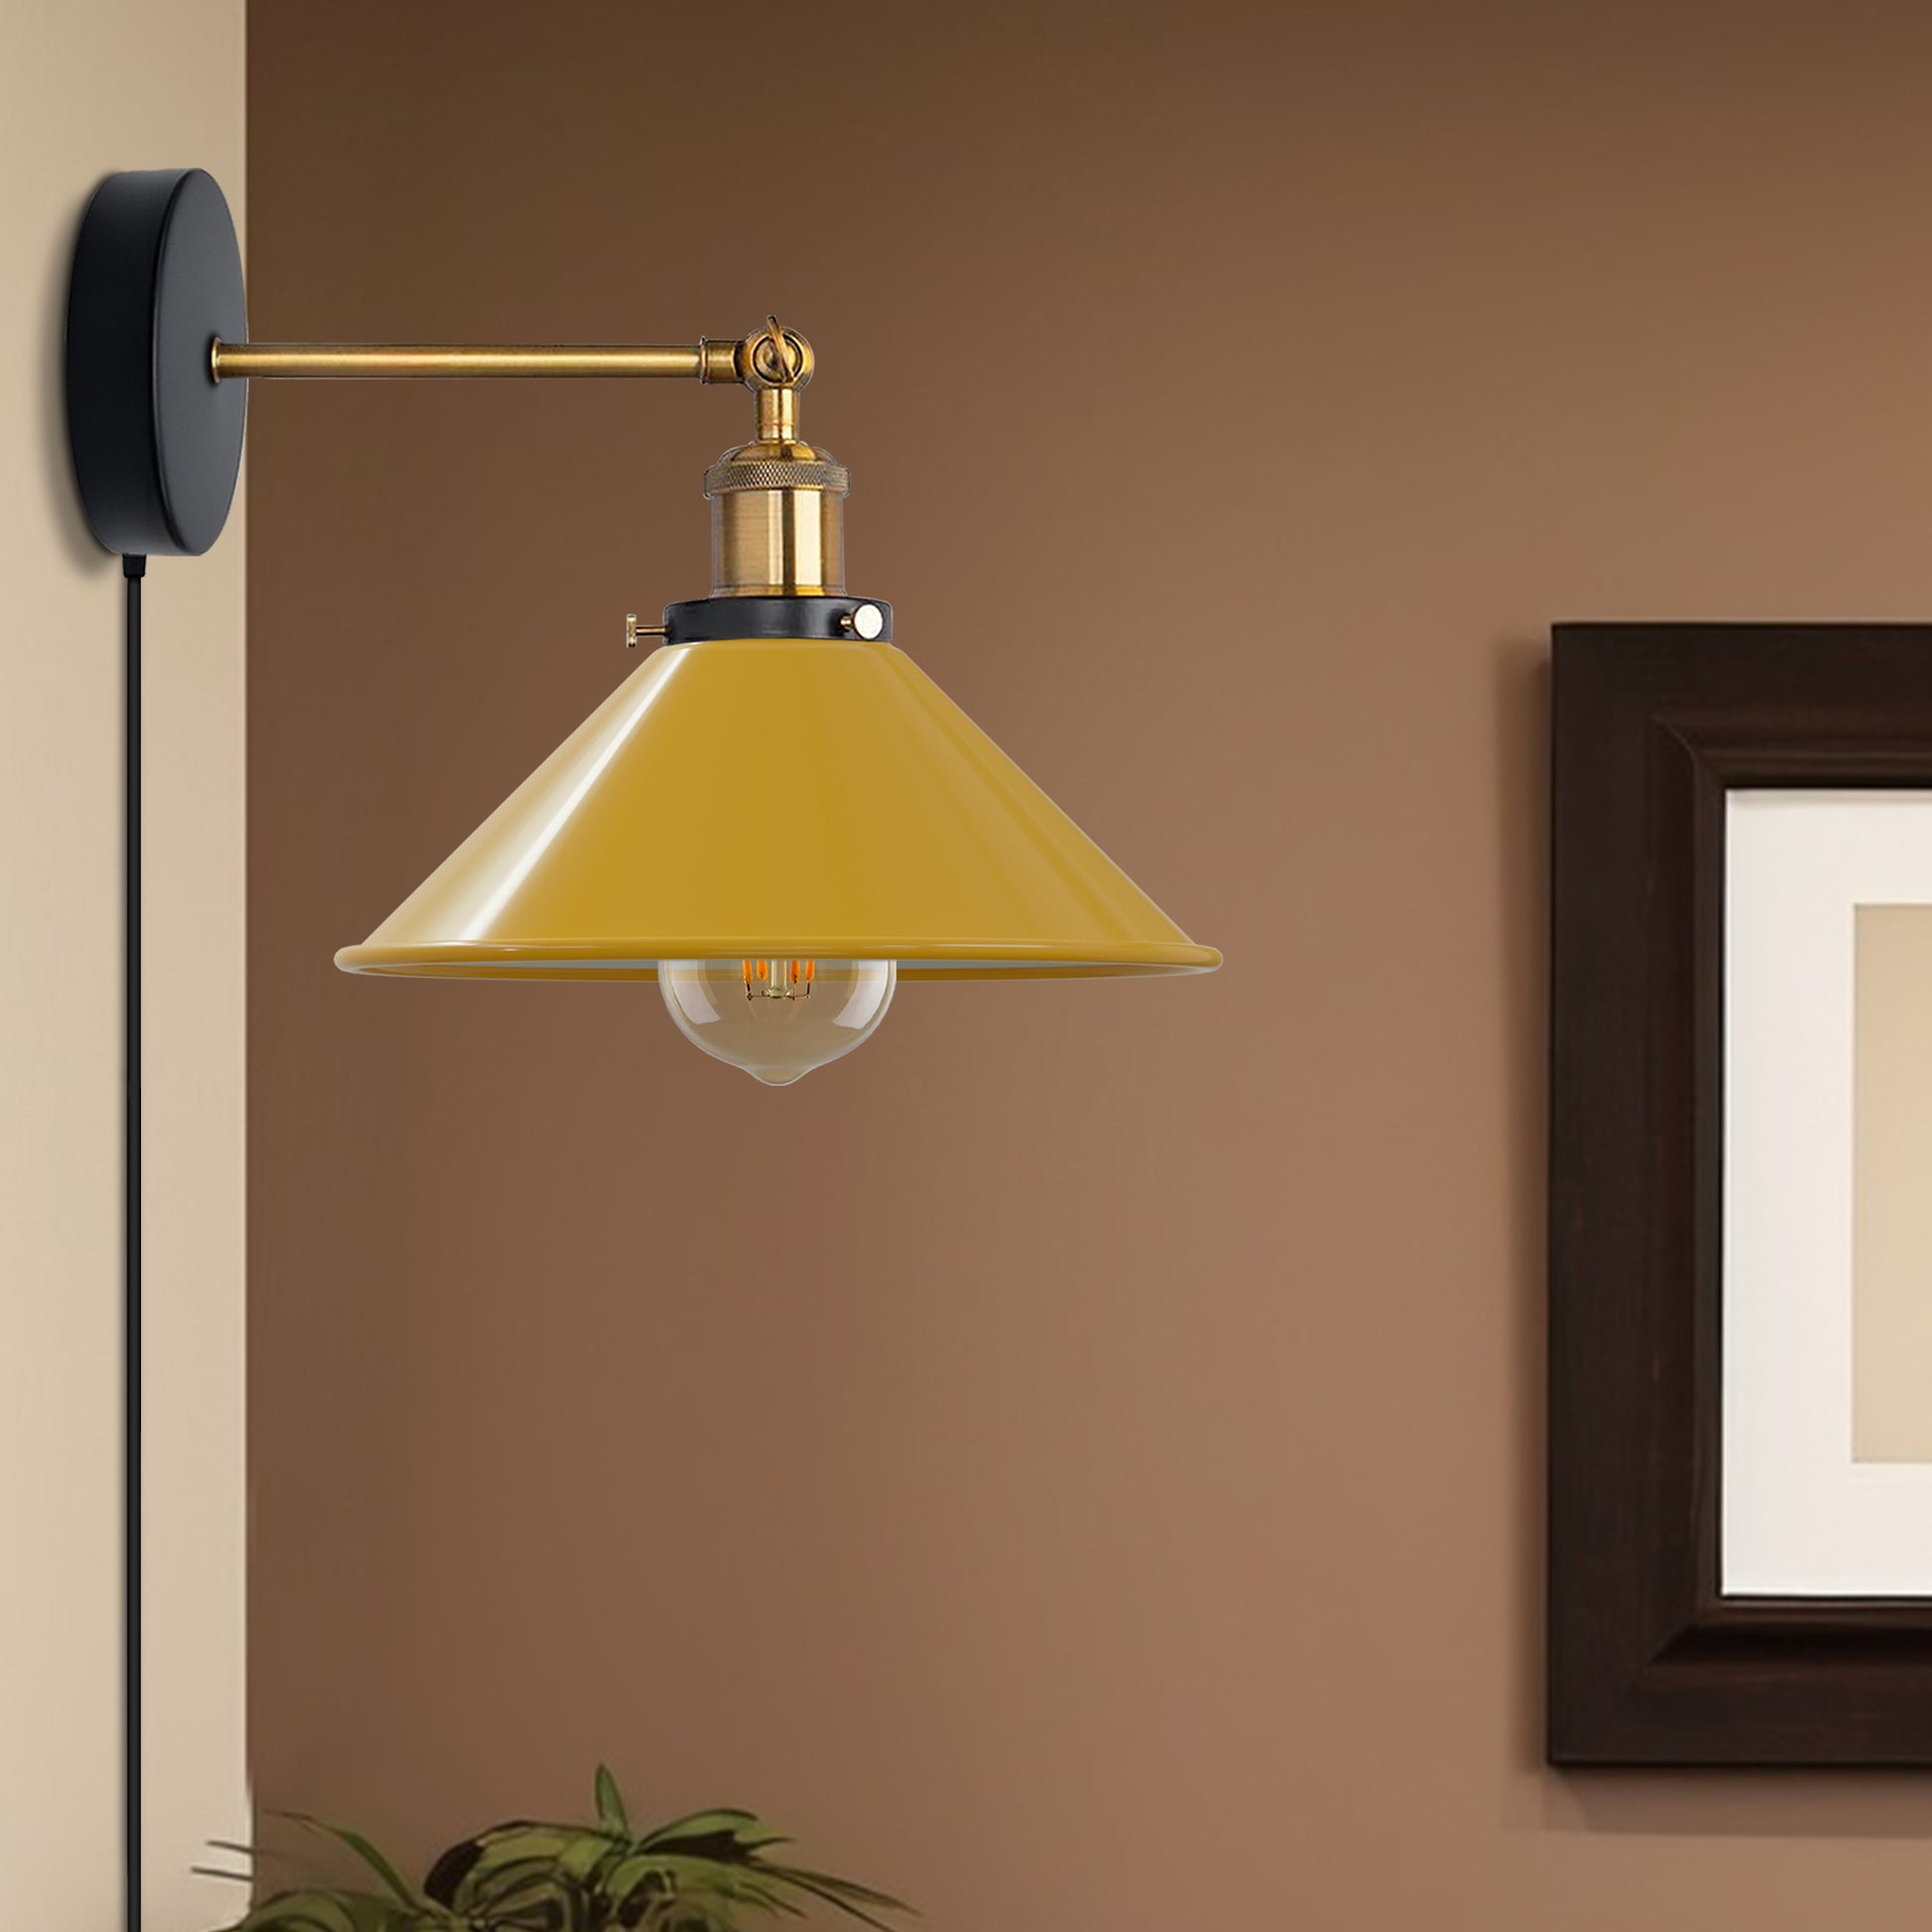 Yellow Plug-in Wall Light Sconces with Dimmer Switch for bed room.JPG